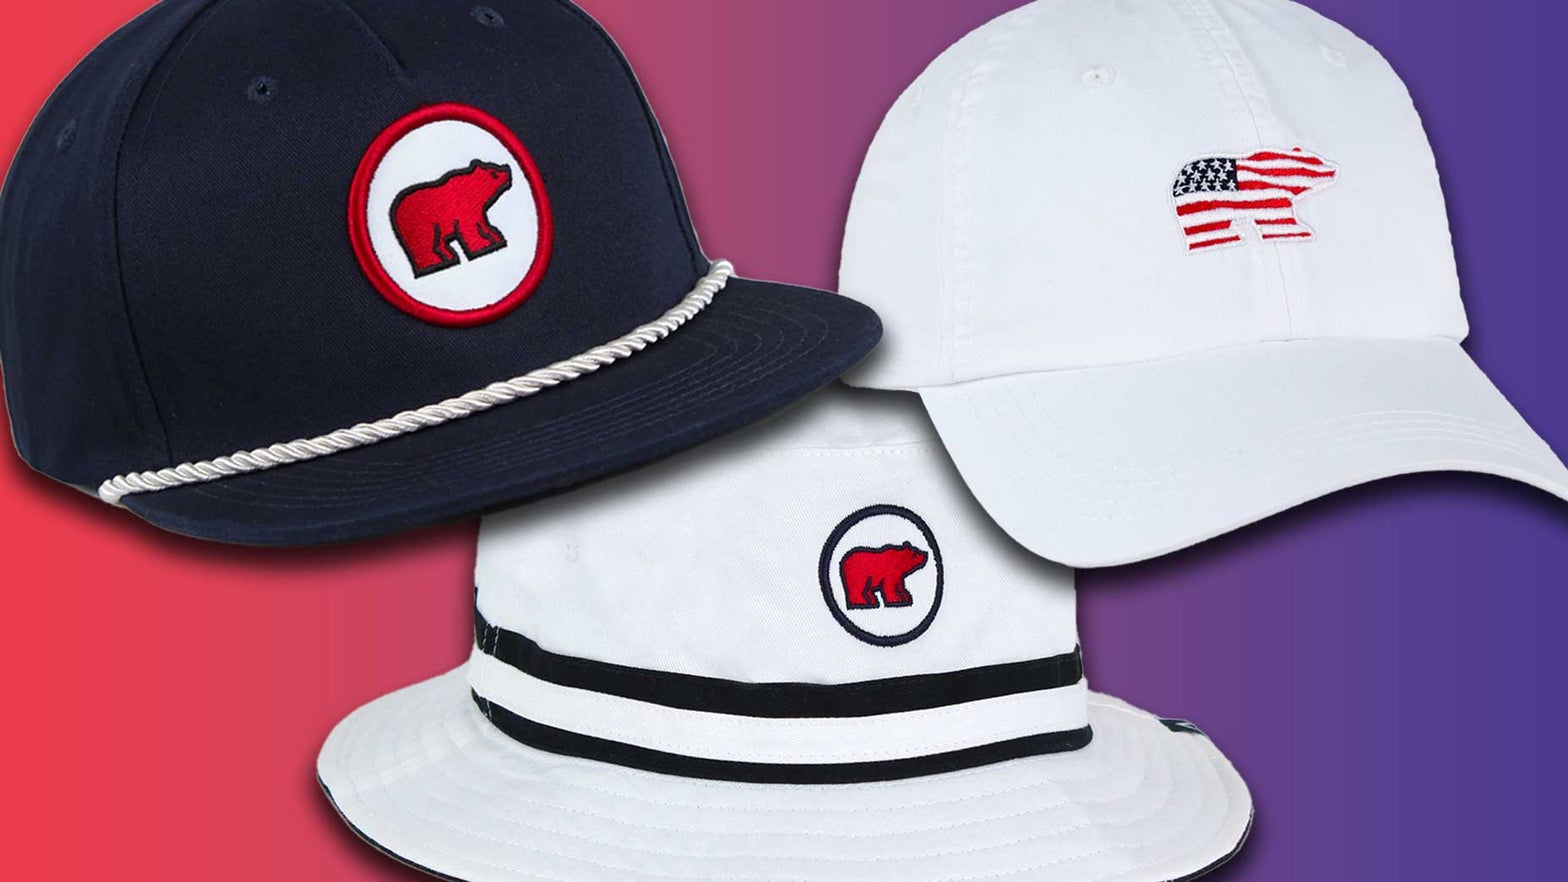 New USAthemed Nicklaus hats are here to kick off the U.S. Open